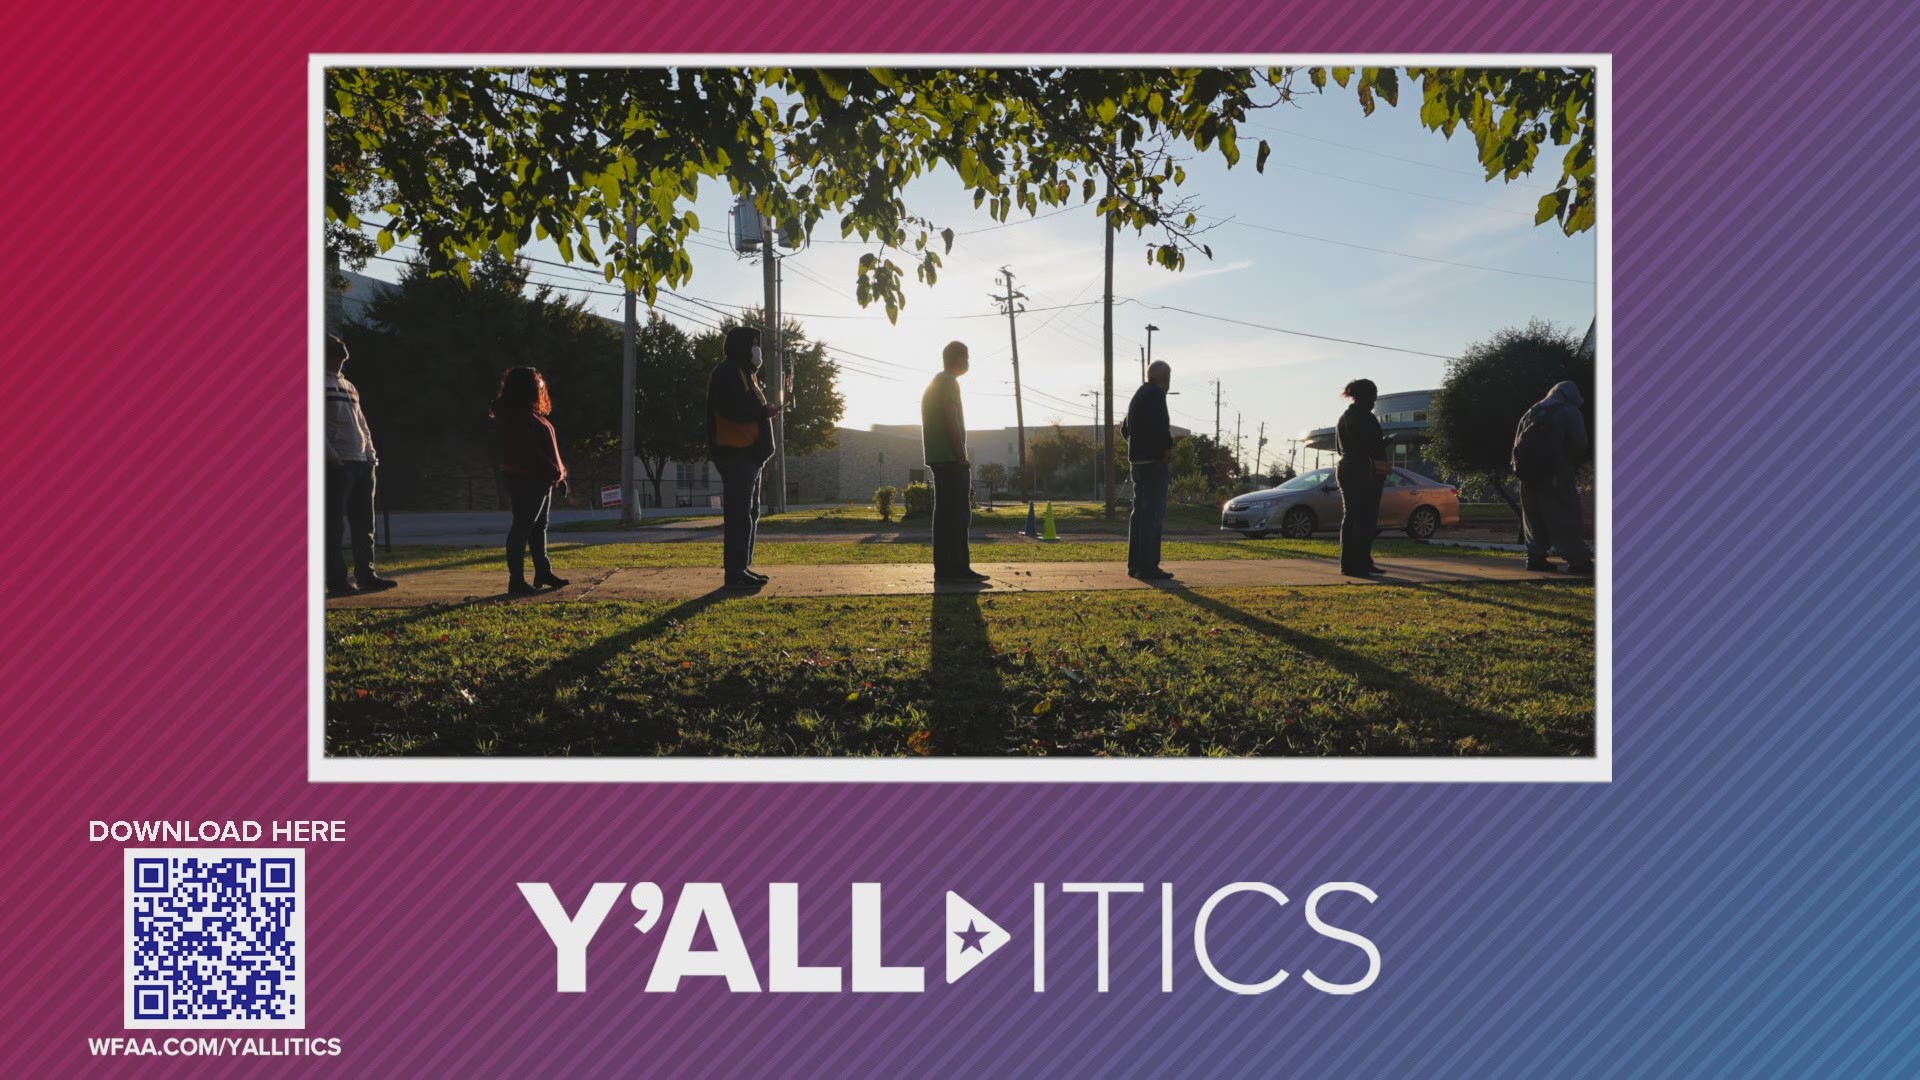 In this episode of Y’all-itics, the Jasons speak with Dr. Ray Perryman about the potential impact of House Bill 6 and Senate Bill 7.